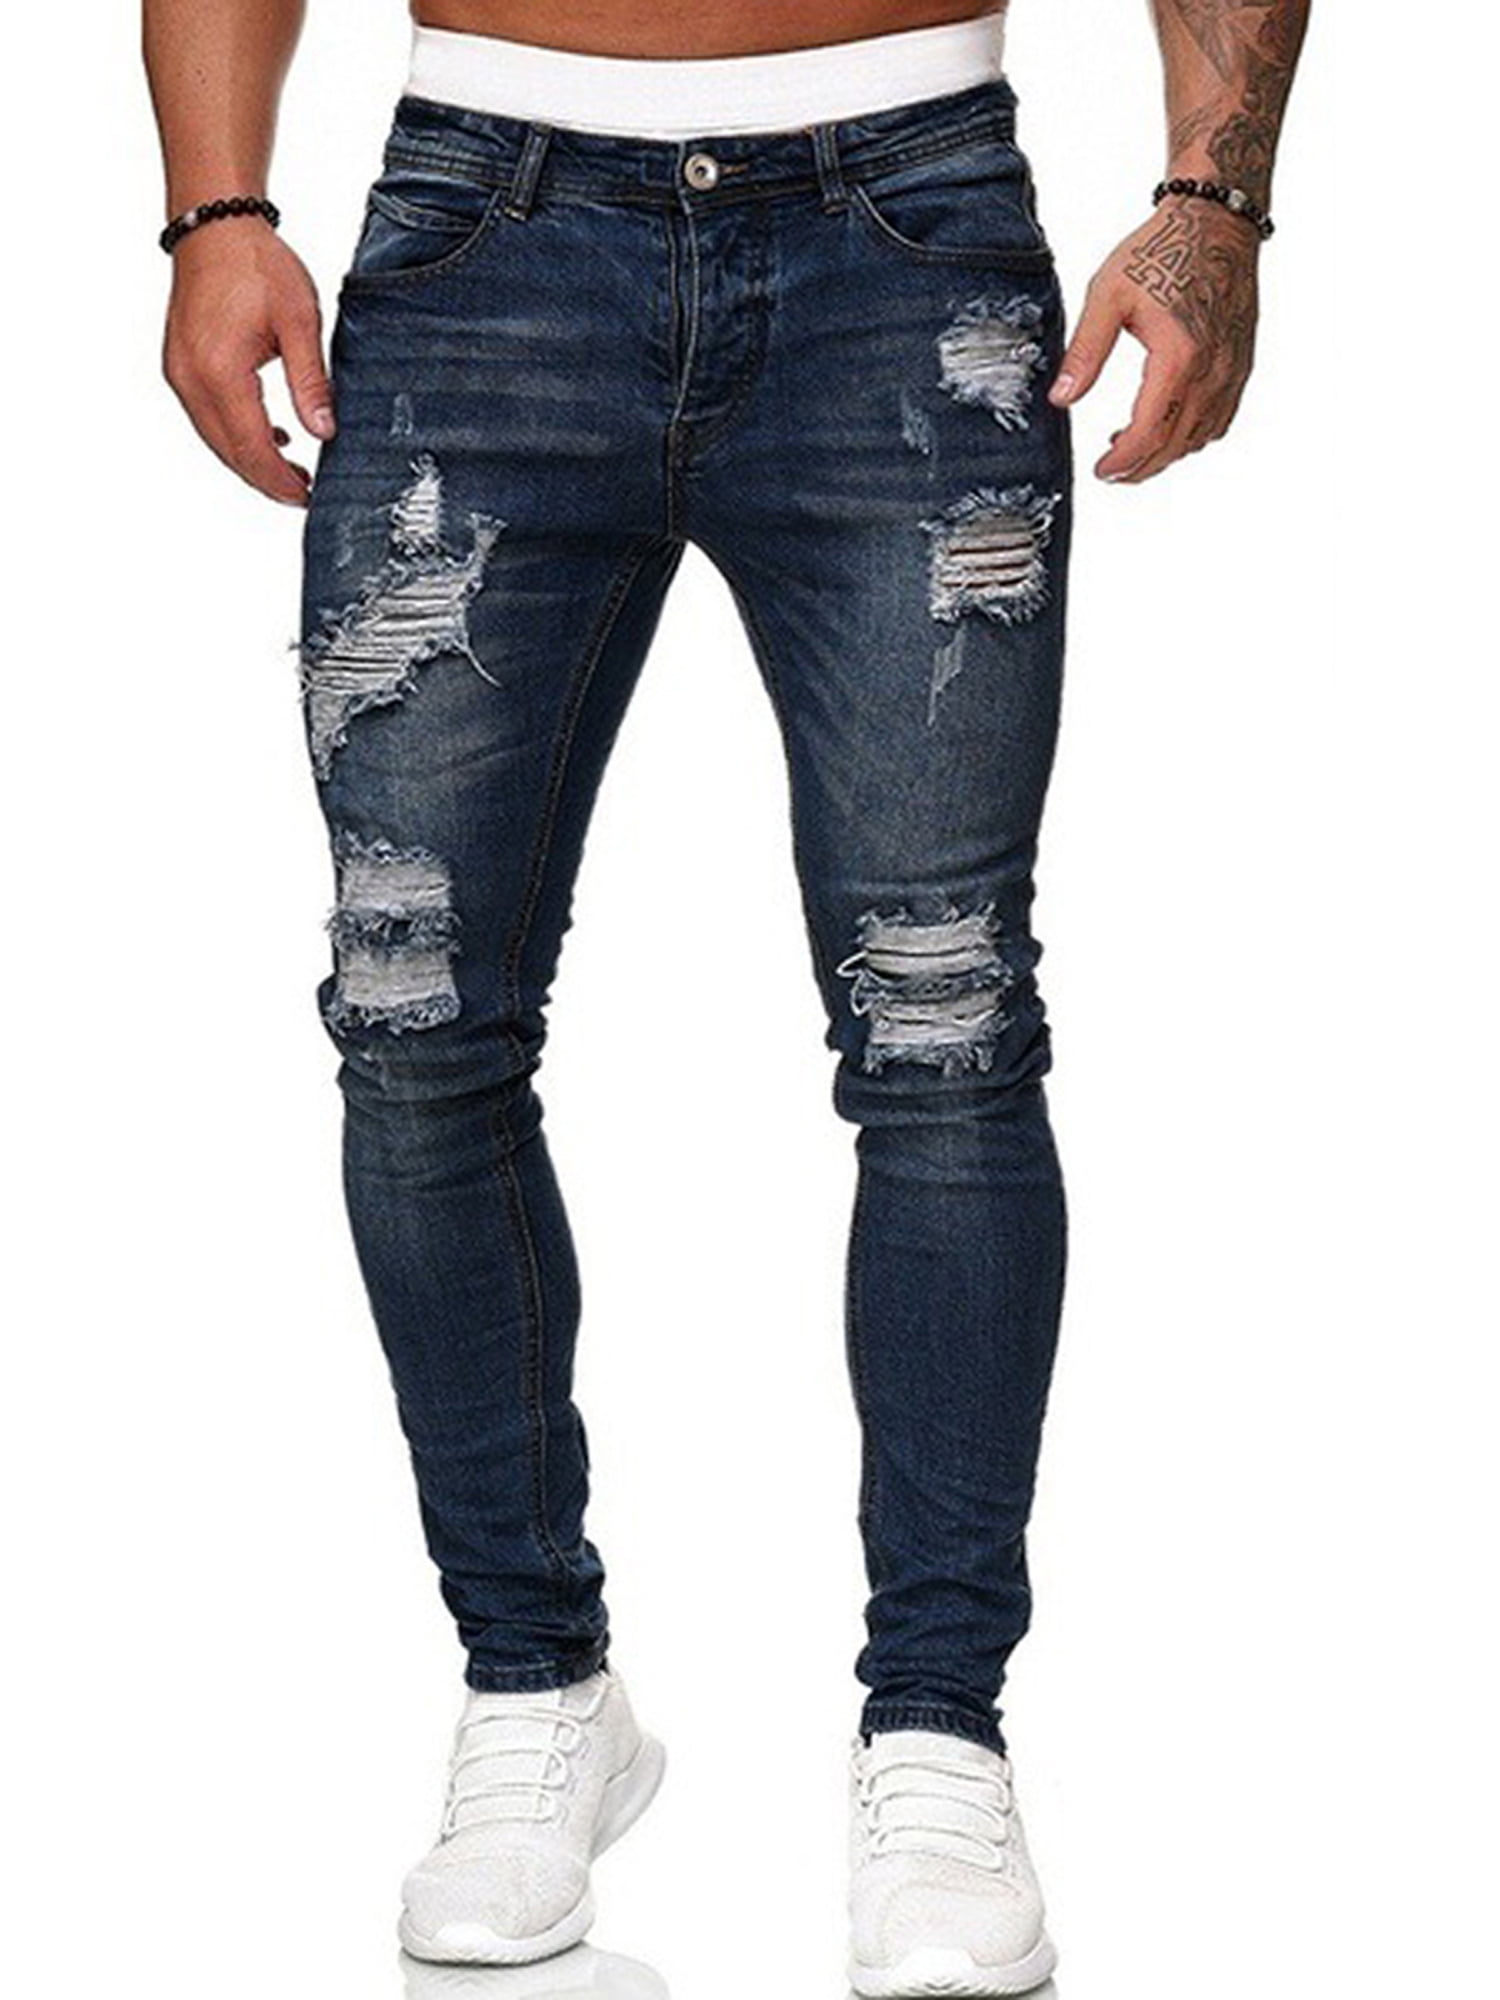 cosa Abandono desbloquear Men?s Stretch Skinny Ripped Jeans, Super Comfy Distressed Denim Pants with  Destroyed Holes - Walmart.com